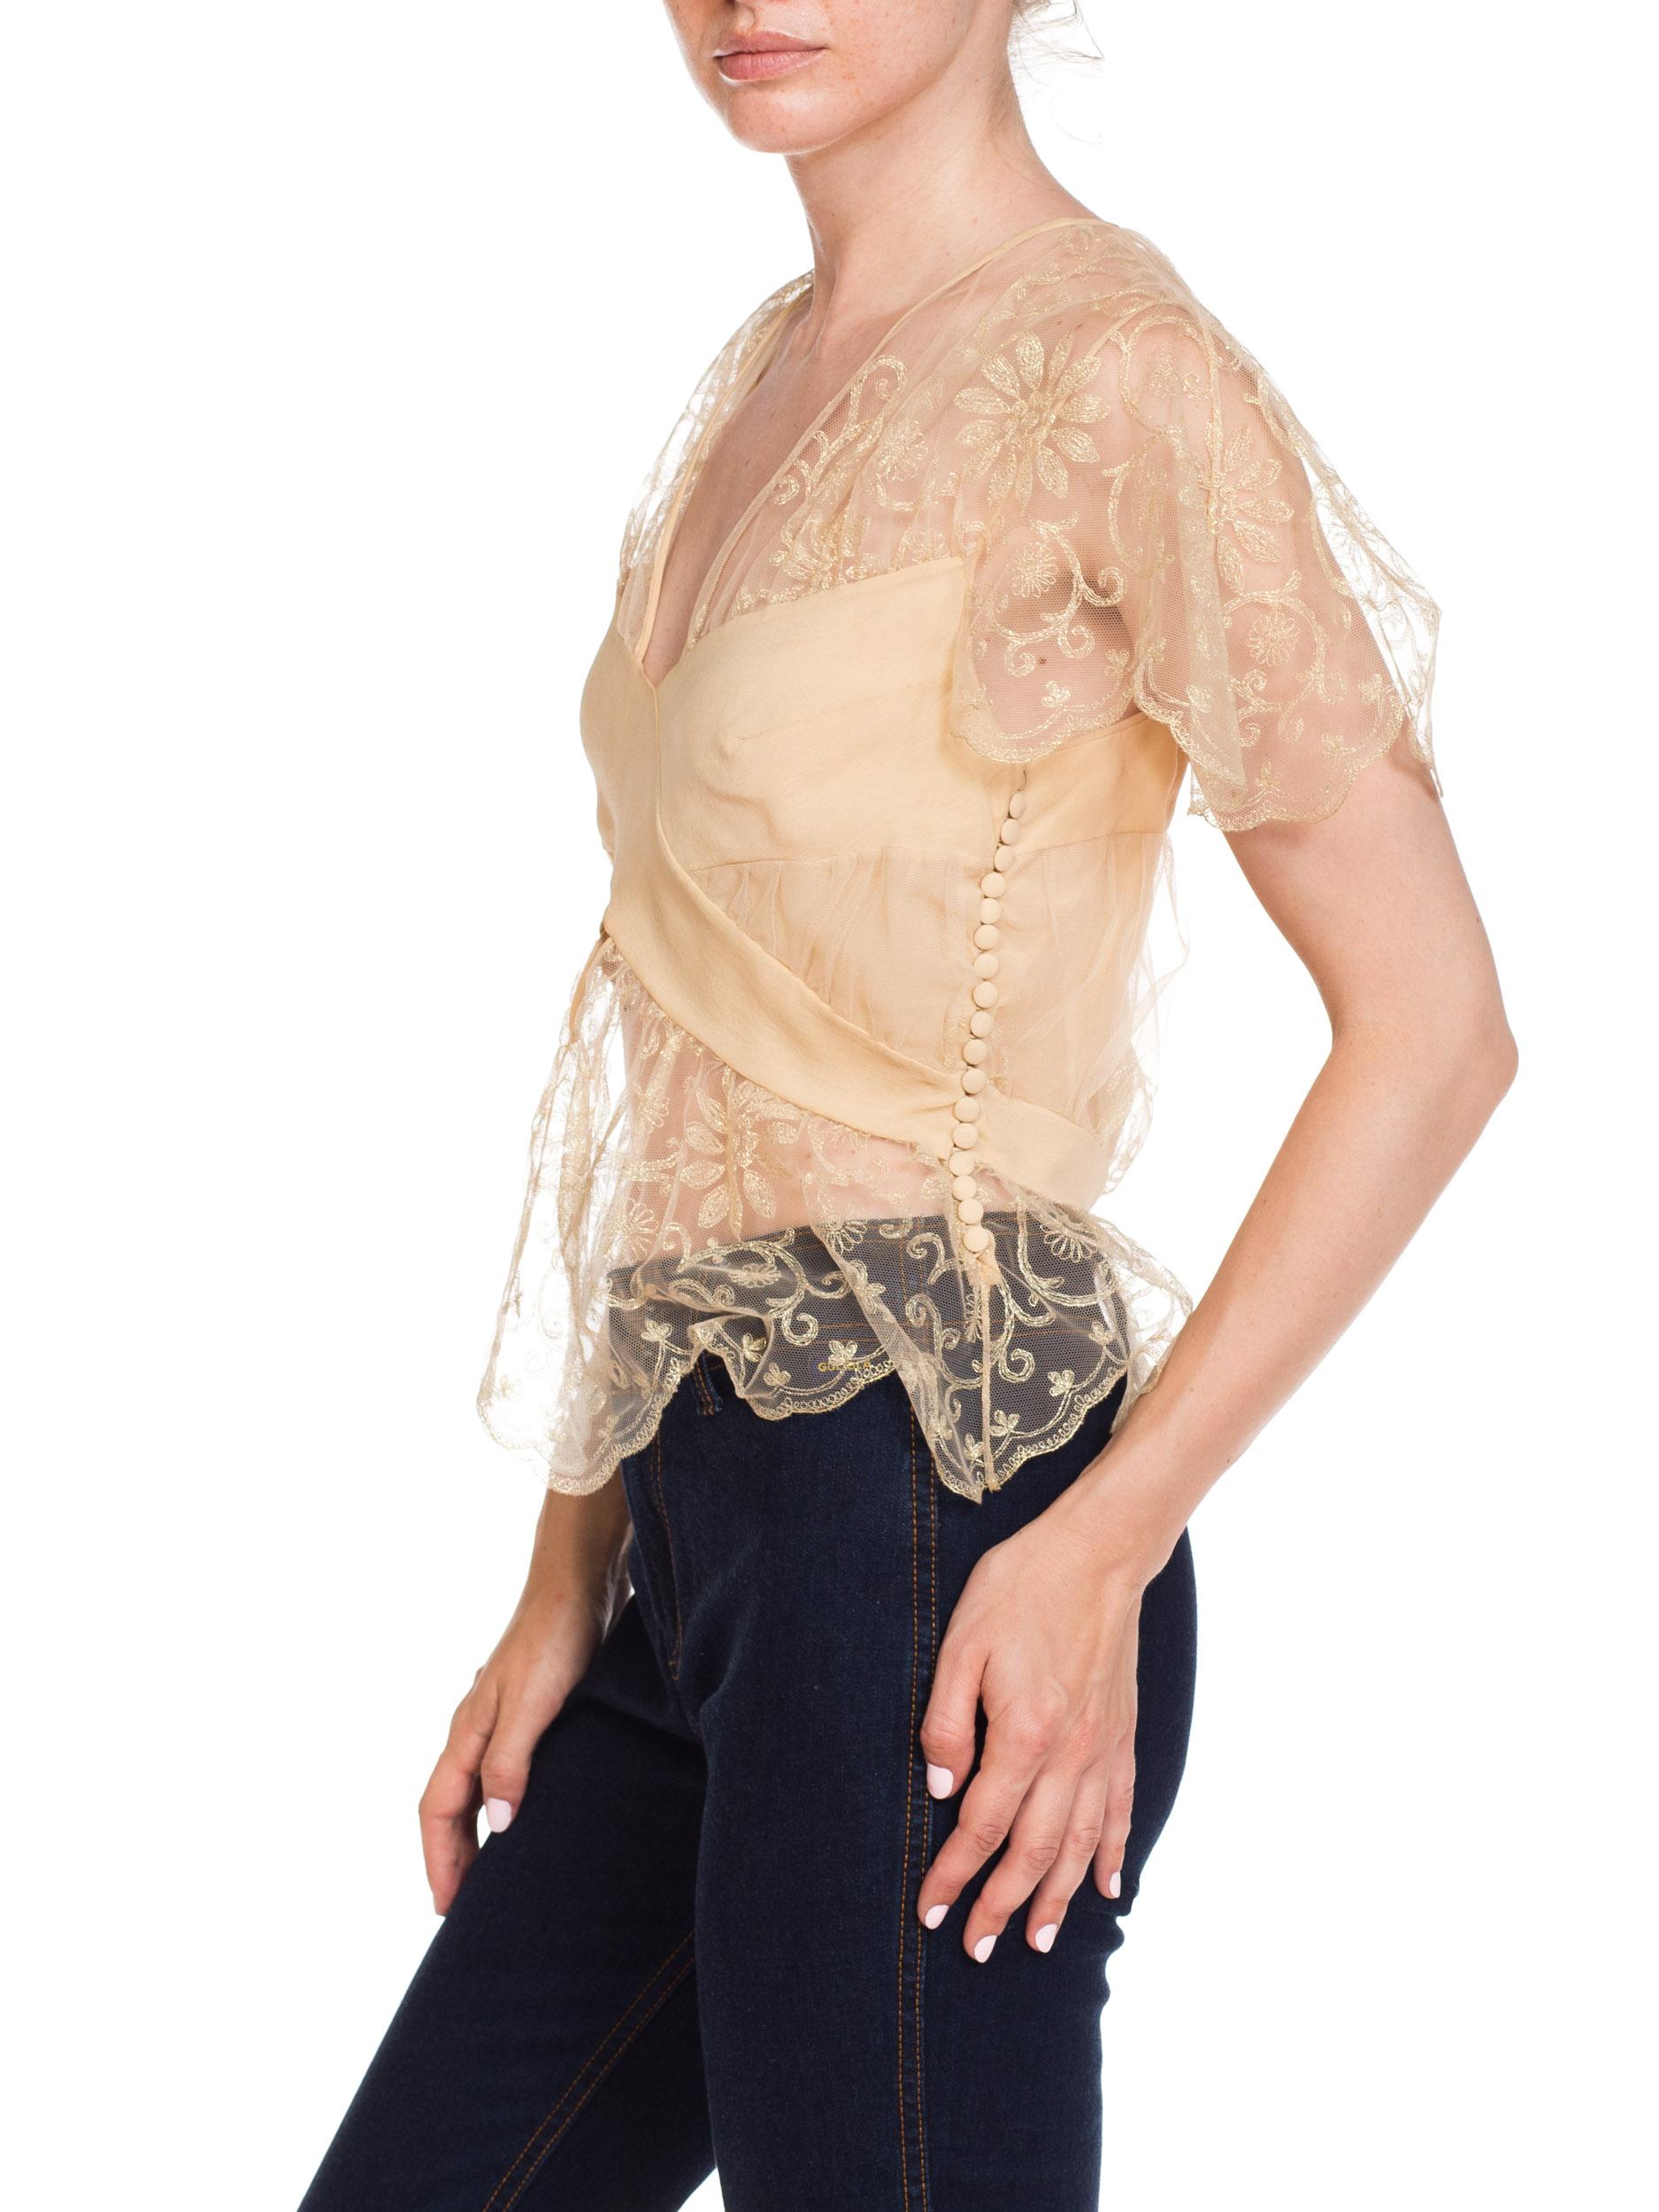 John Galliano for Christian Dior Sheer Lace Blouse 1